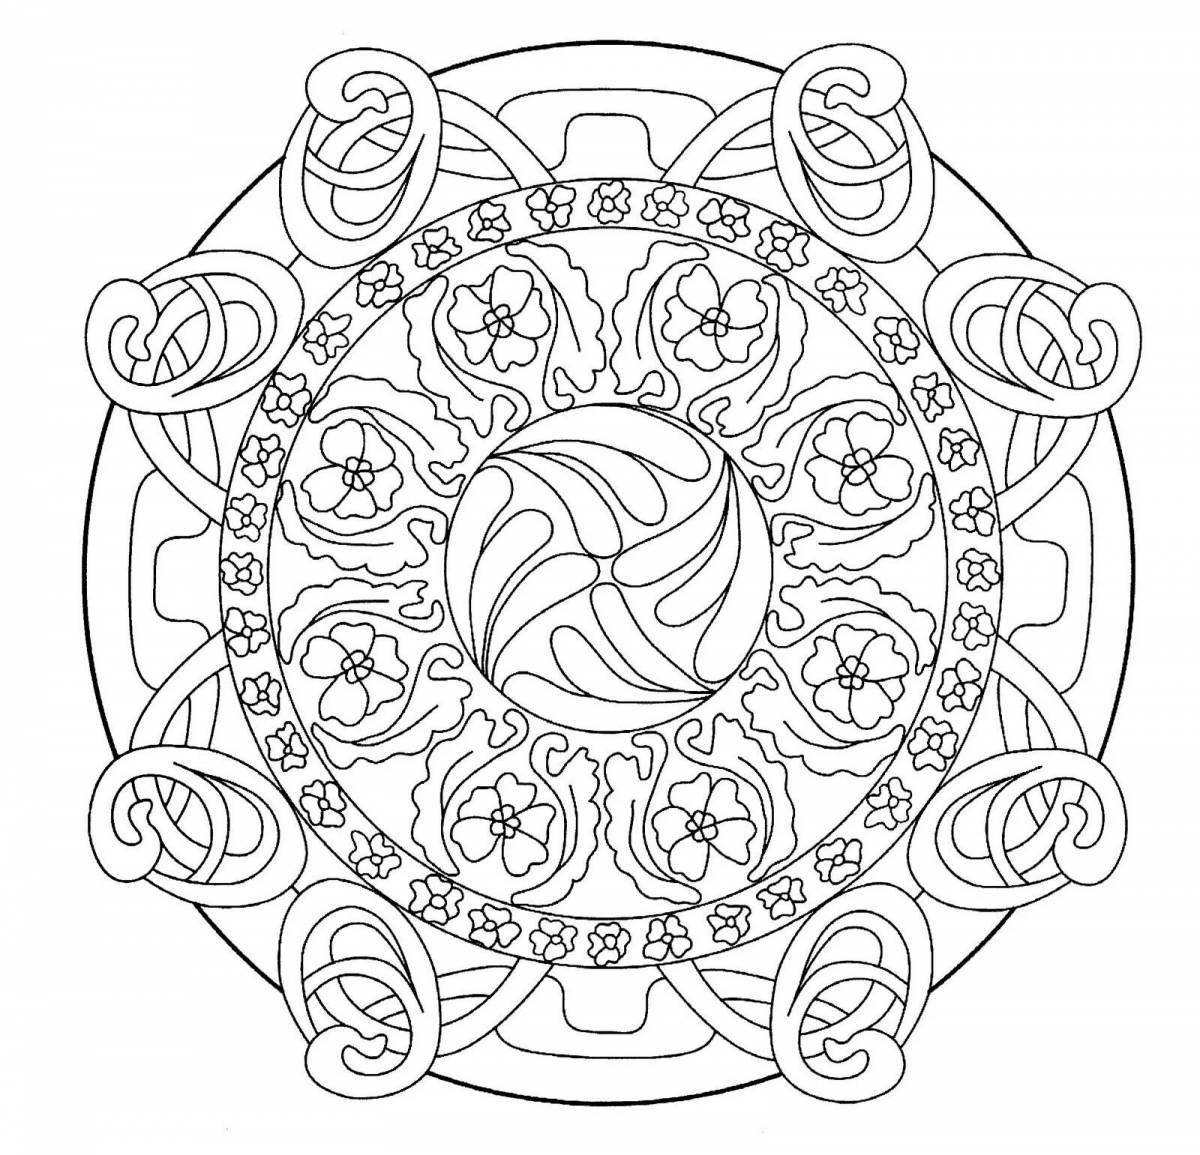 Gorgeous wealth mandala coloring page